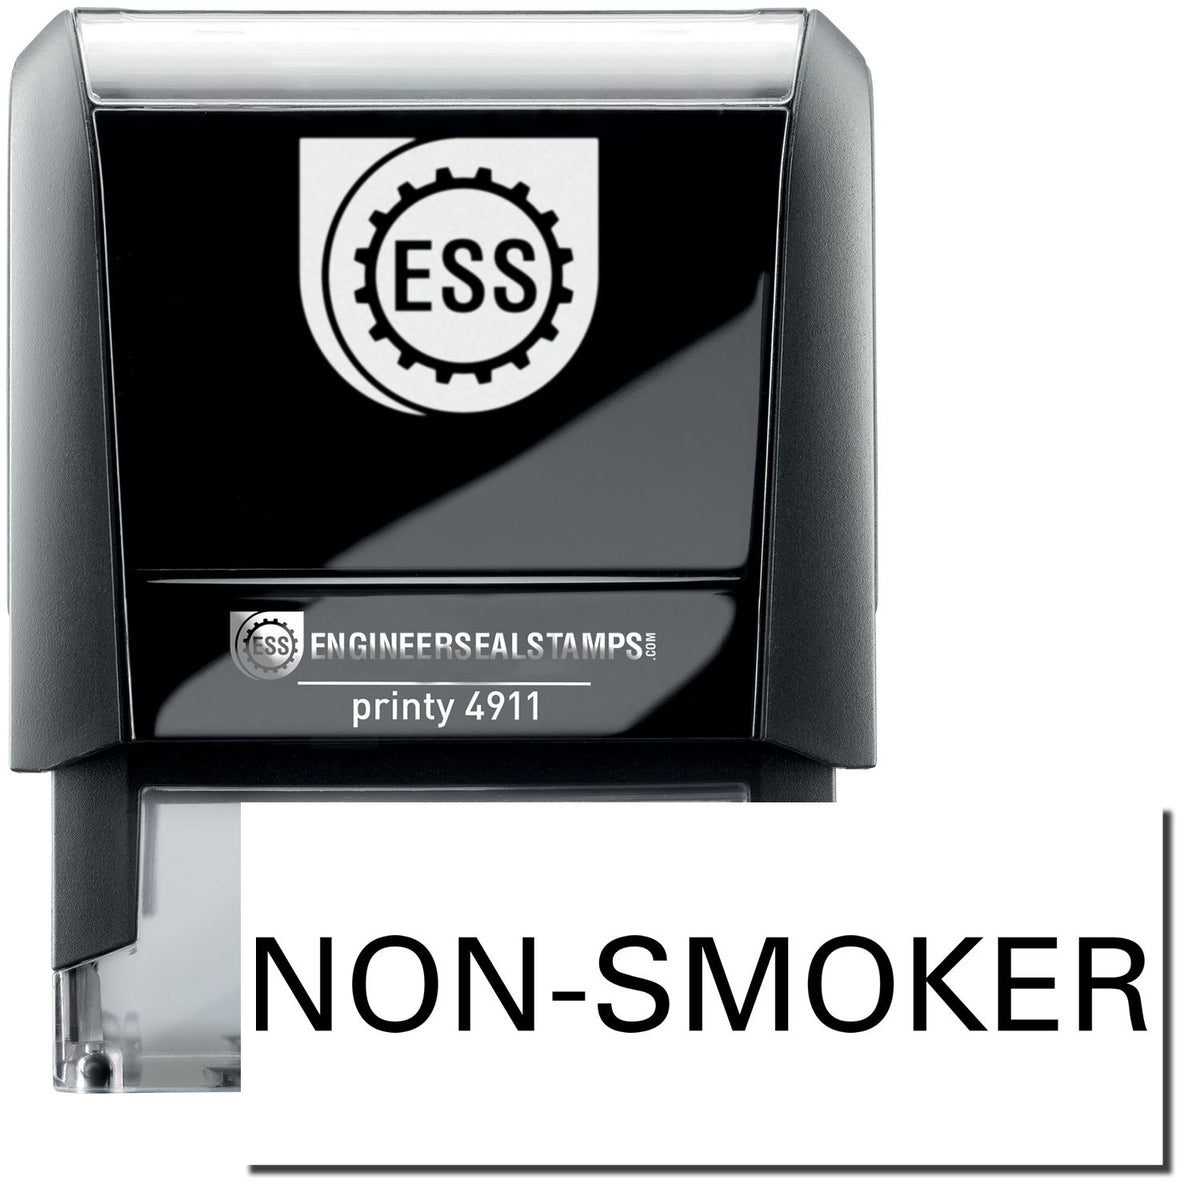 A self-inking stamp with a stamped image showing how the text &quot;NON-SMOKER&quot; is displayed after stamping.